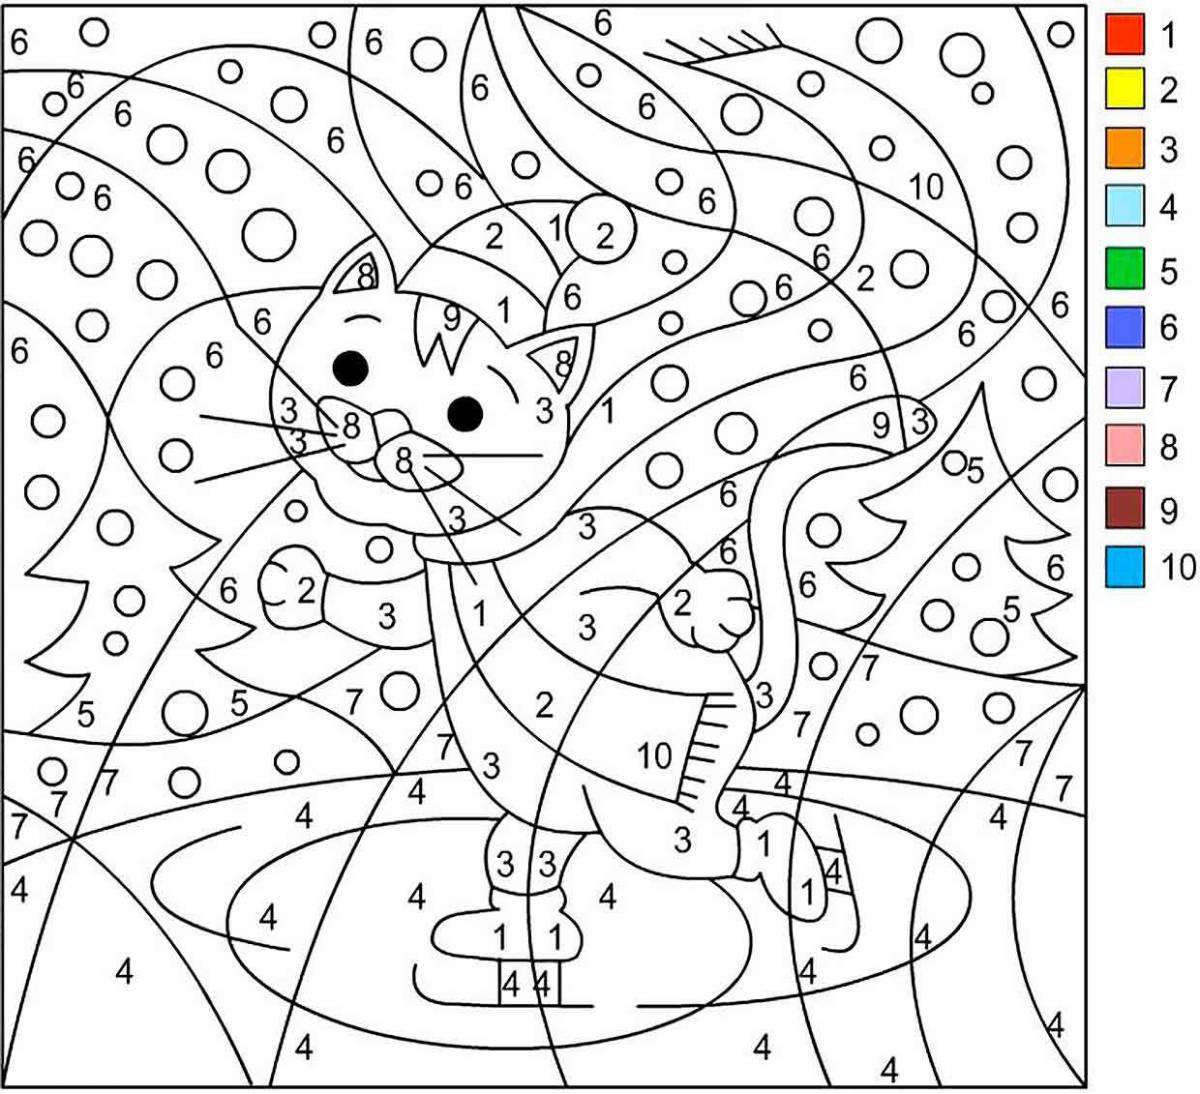 Fun coloring by numbers for kids 5-6 years old